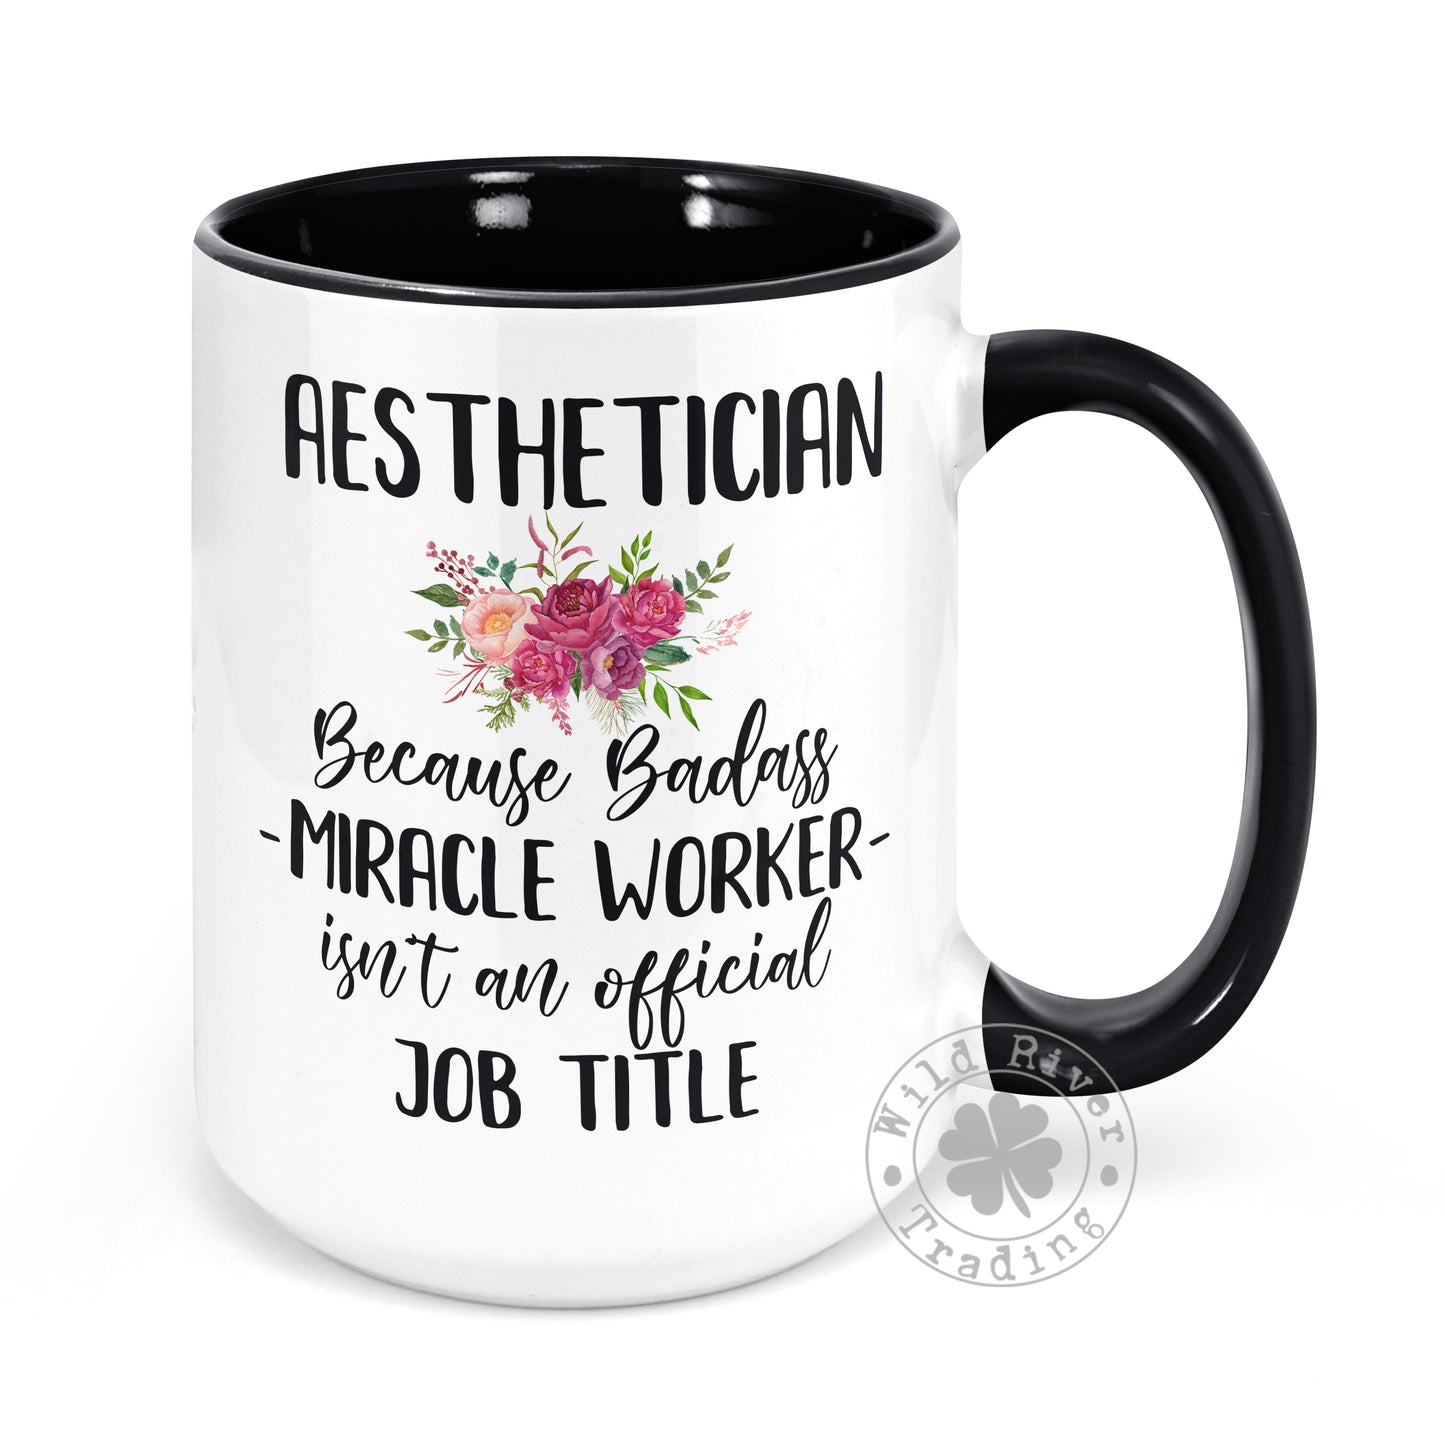 Badass Miracle Worker Personalized Name and Job Title Mug